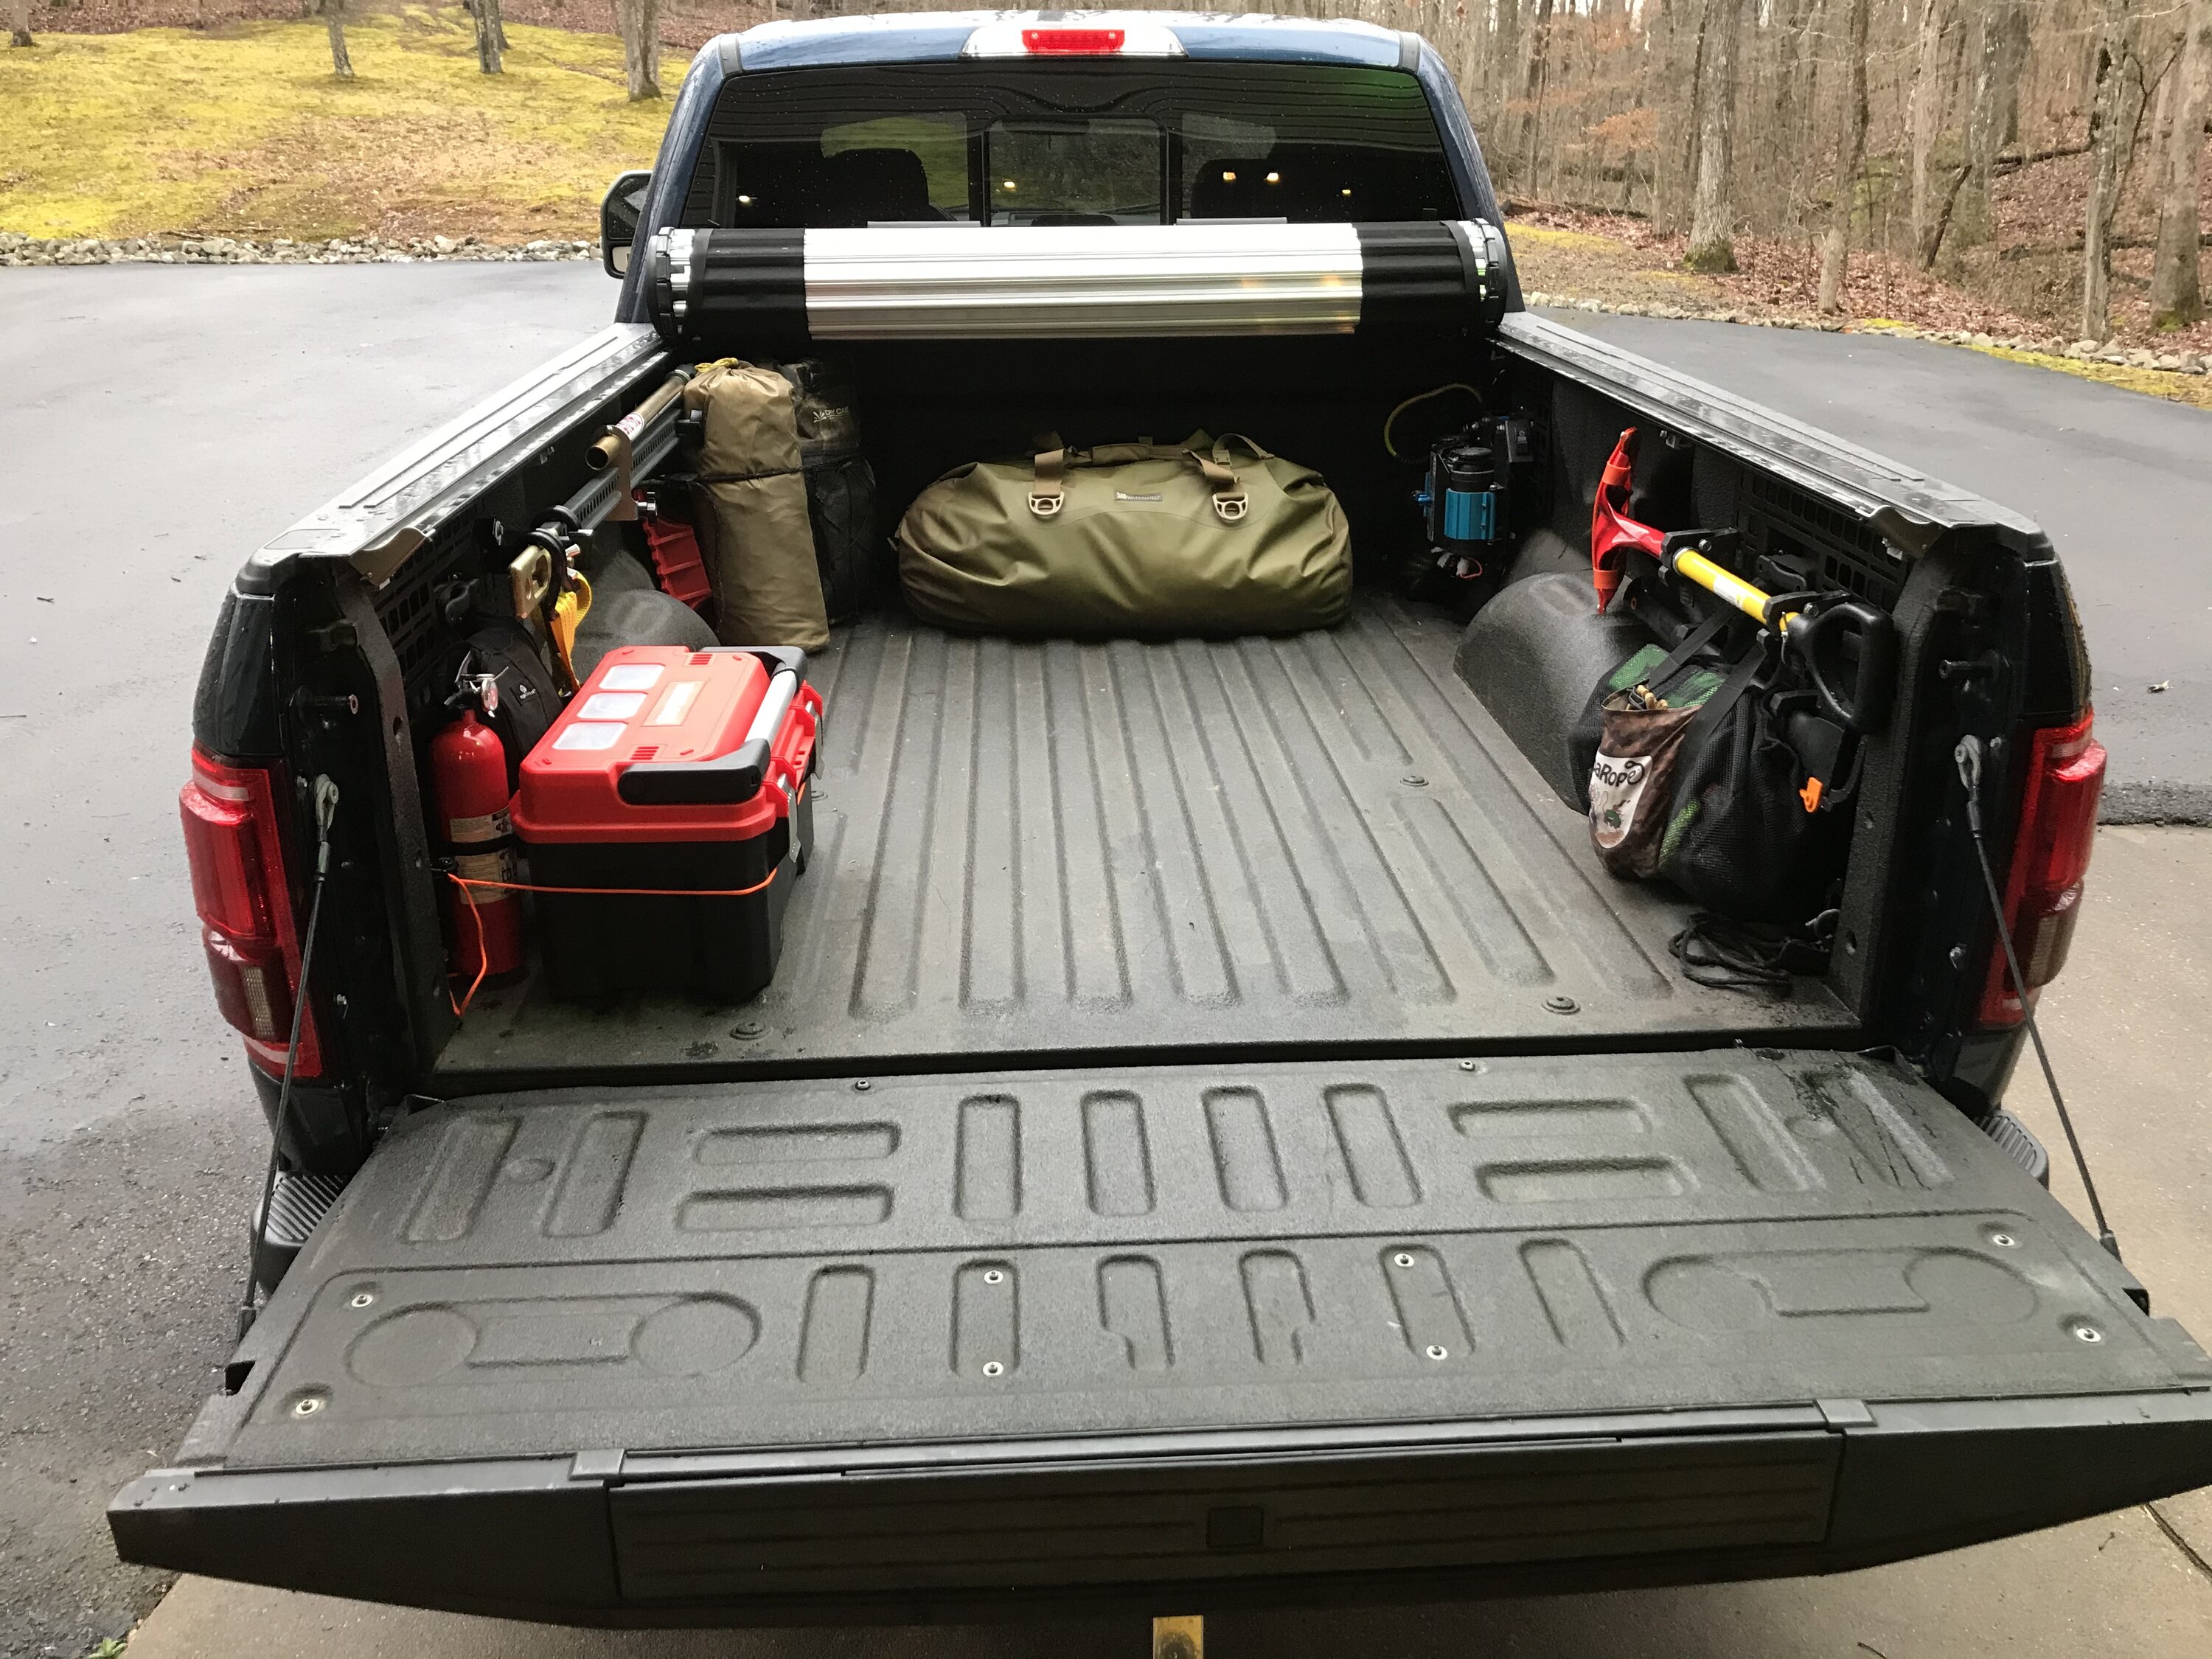 Ford Bronco Found a pretty cool onboard tool kit 1000003252